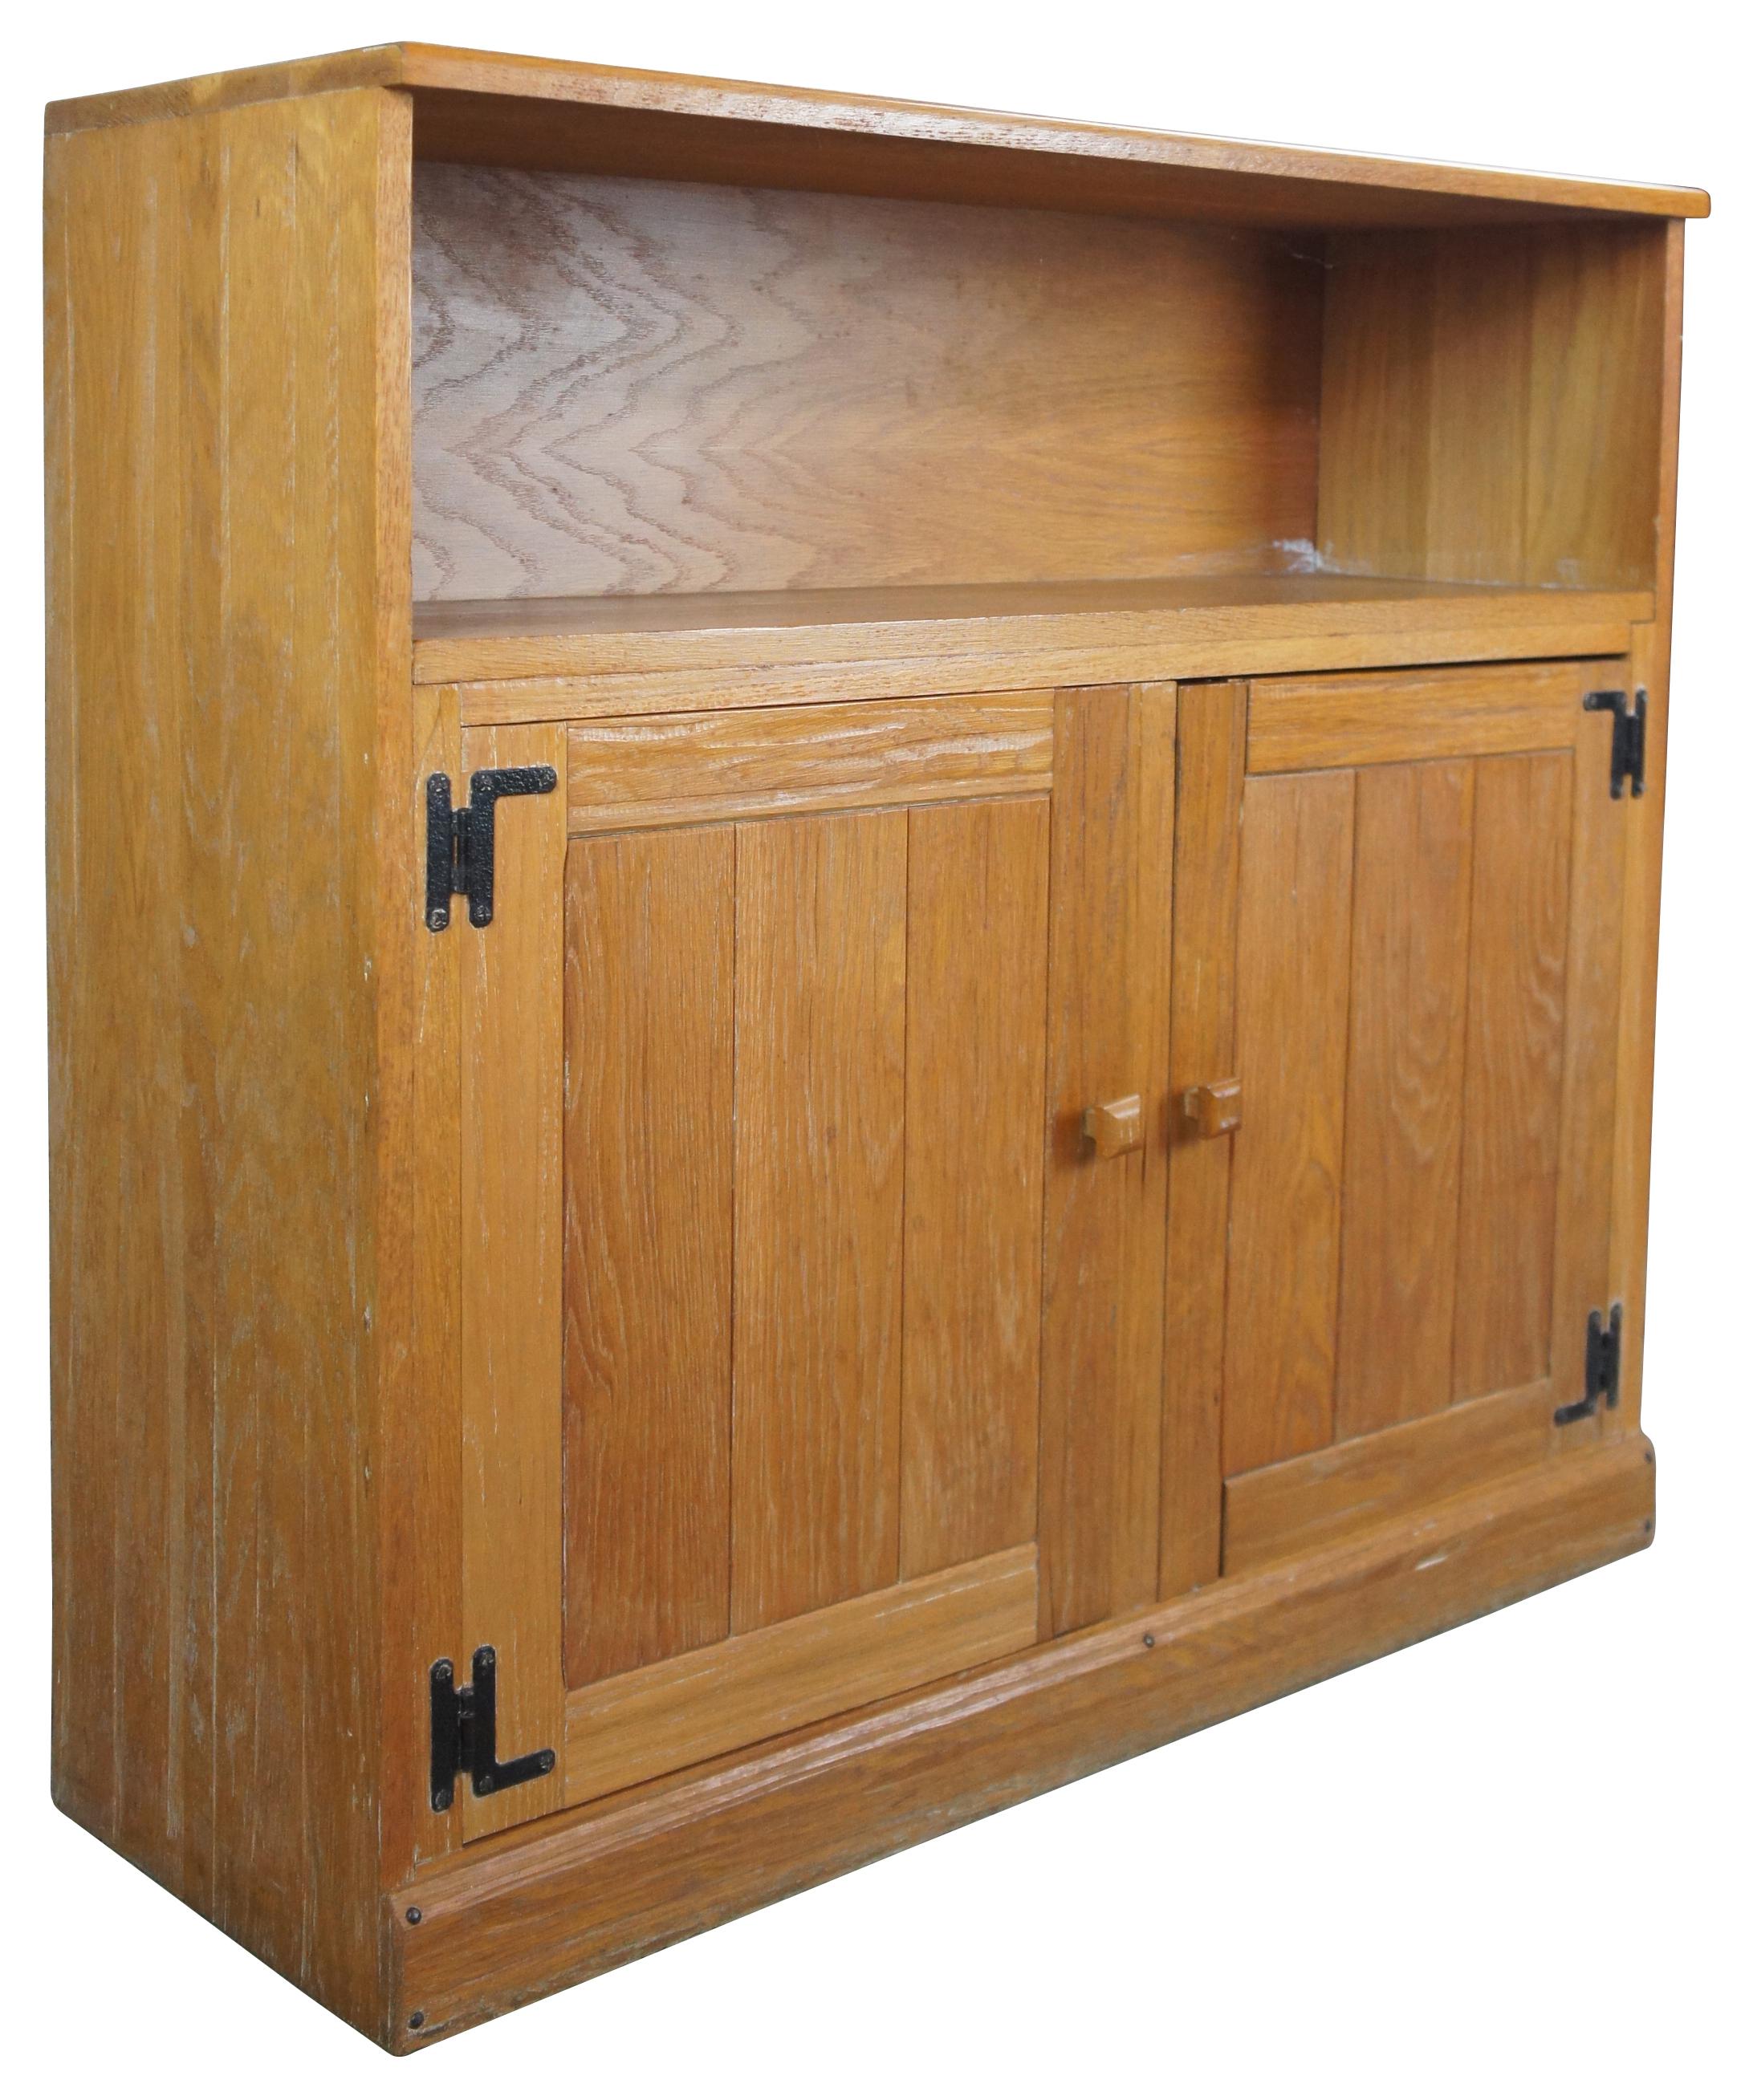 A. Brandt Ranch oak double cabinet #1891N-8 with doors, circa 1960s. The double cabinet or bookcase features a rustic design with two doors and inset shelf. Great for use as a console or media stand.
 